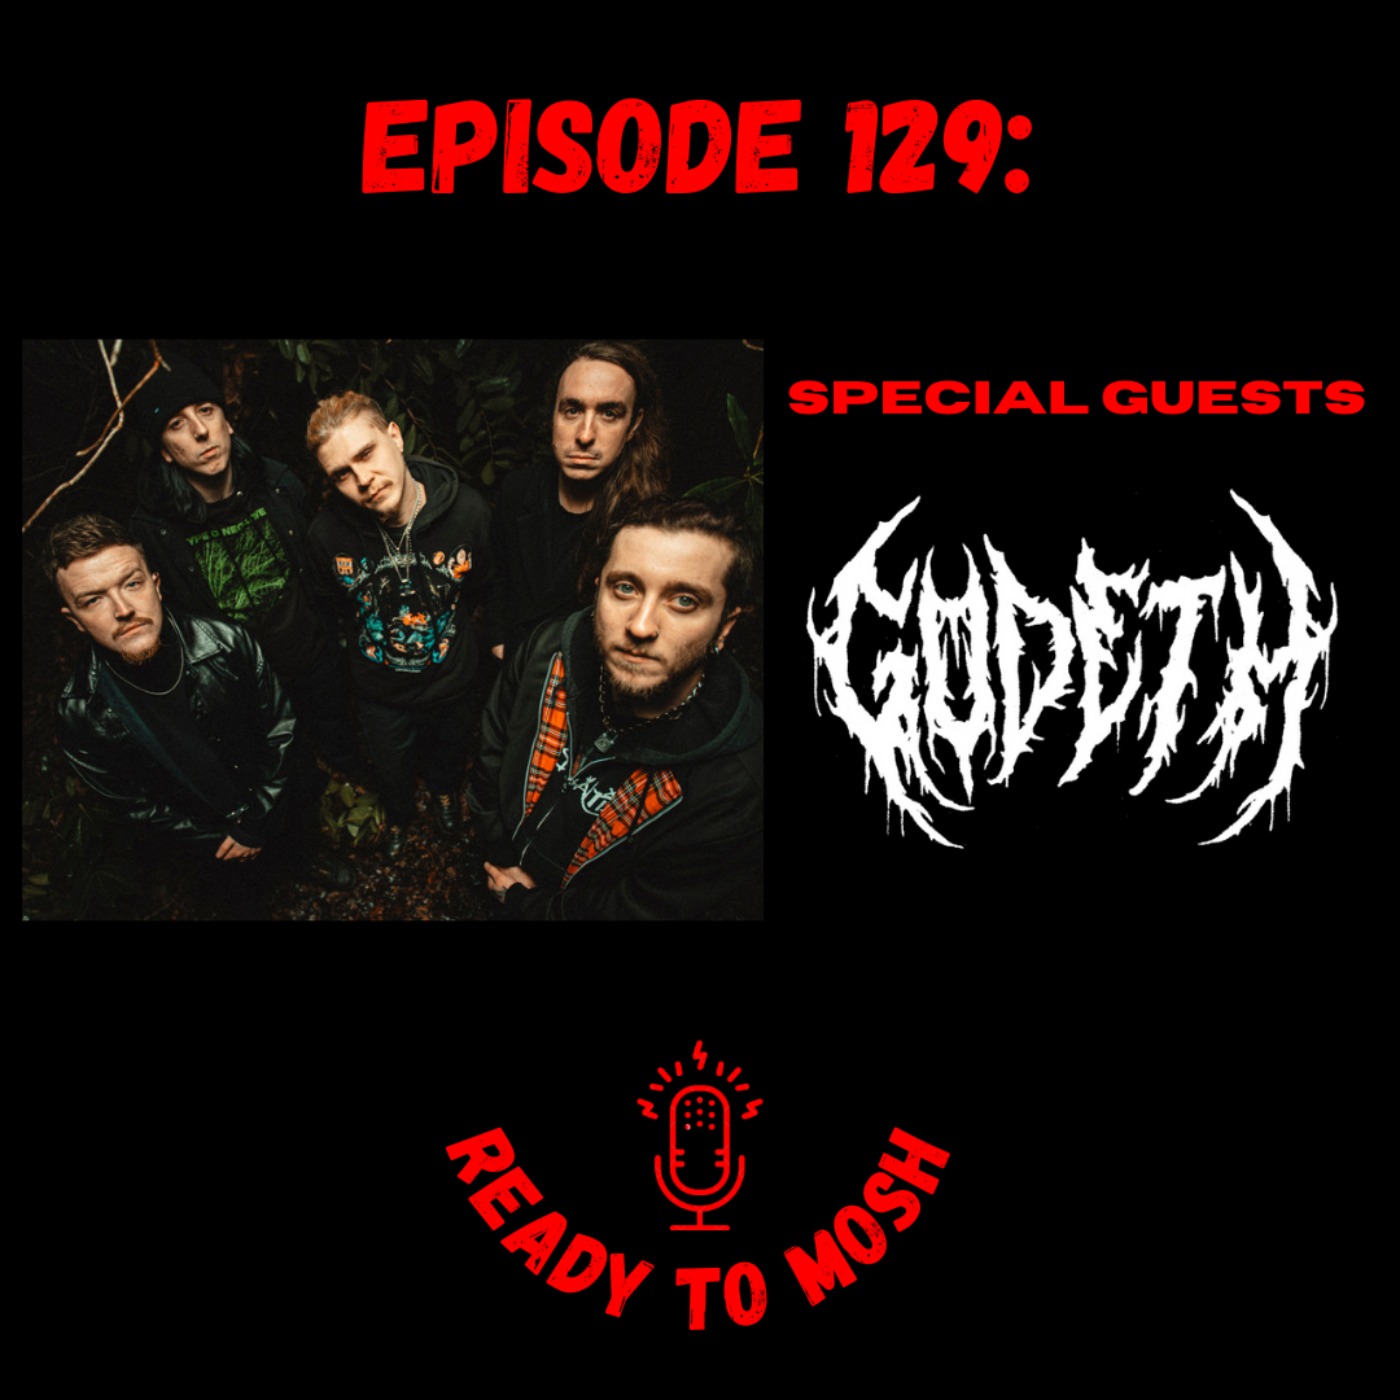 EP 129: Special Guests Godeth